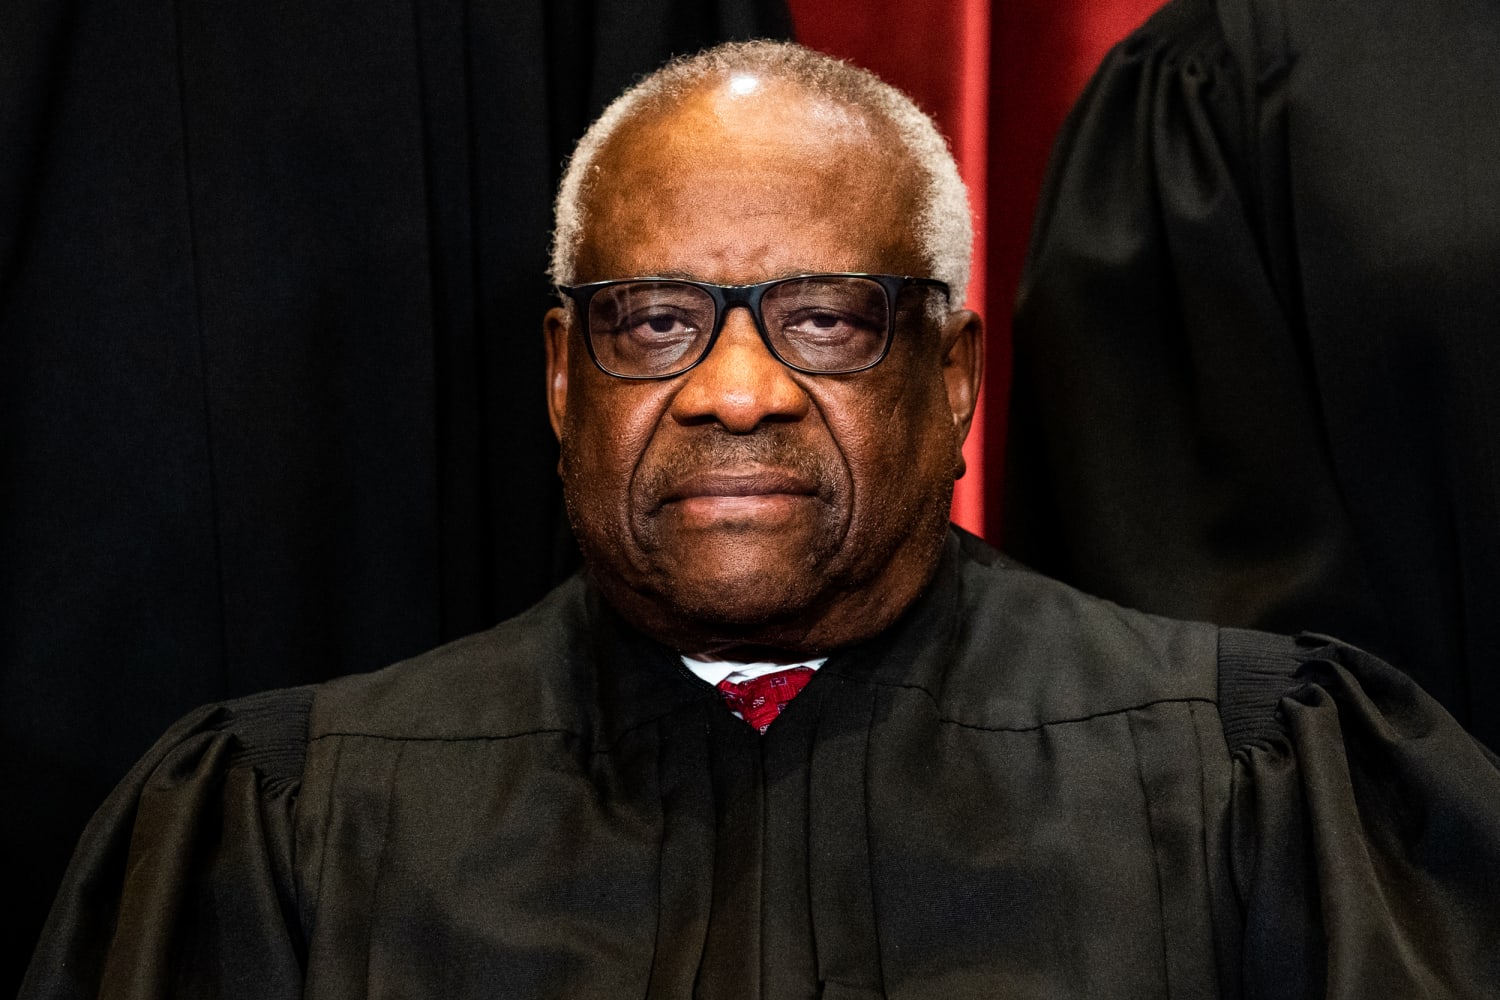 Concerns about Justice Clarence Thomas’ disclosures are sent to judicial panel